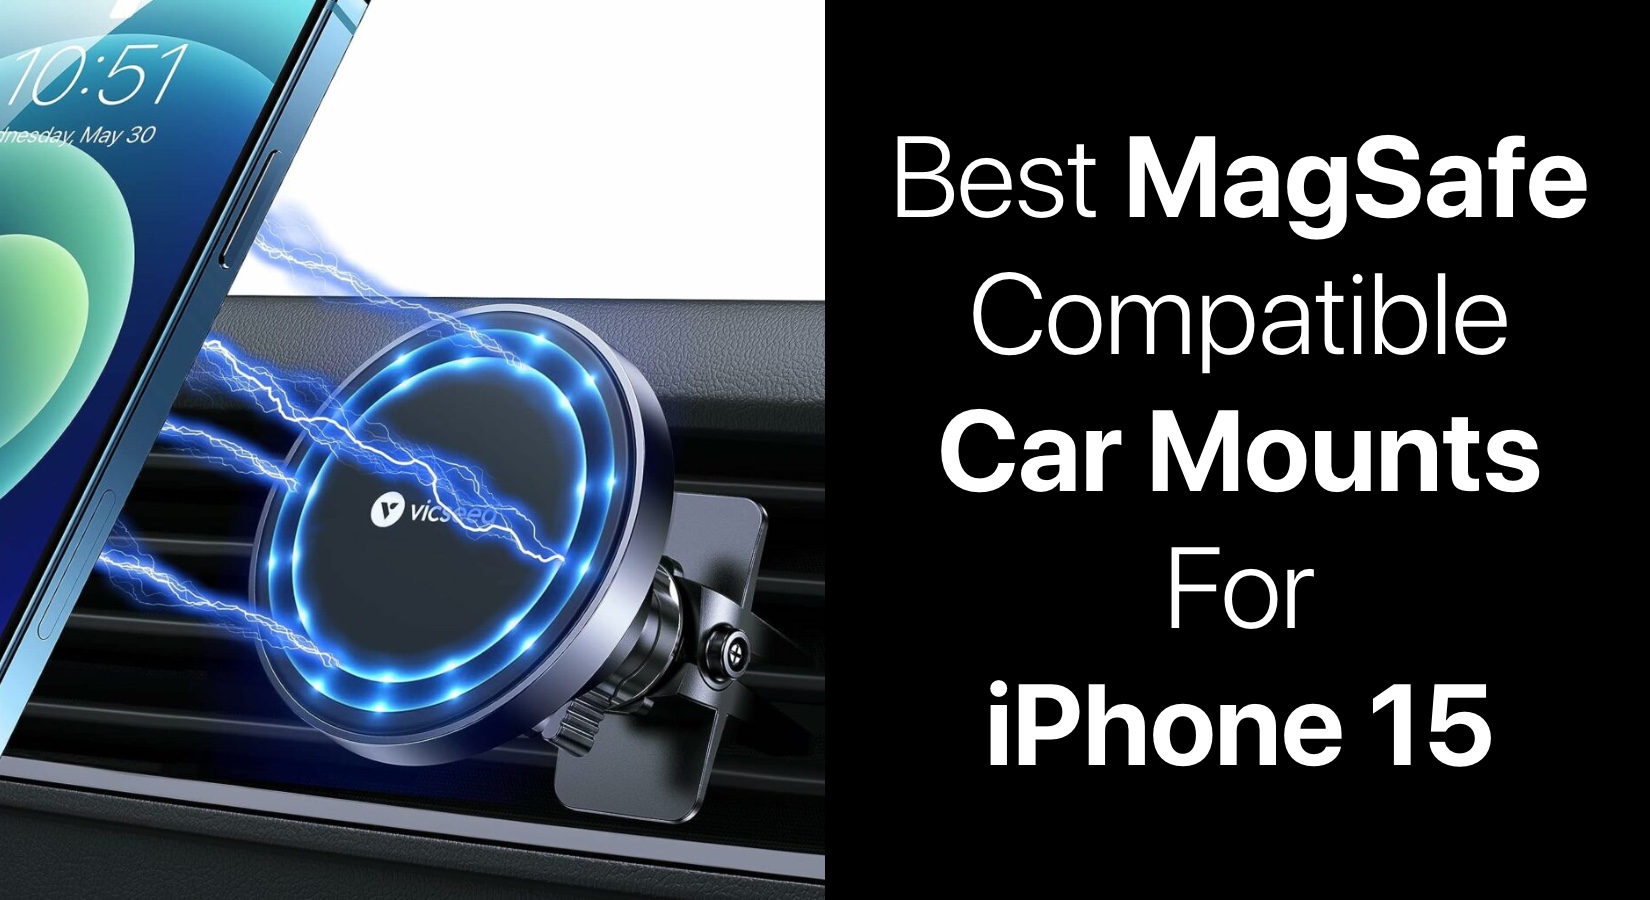 The BEST Magsafe Wireless Car Charger - ESR 15W MagSafe Car